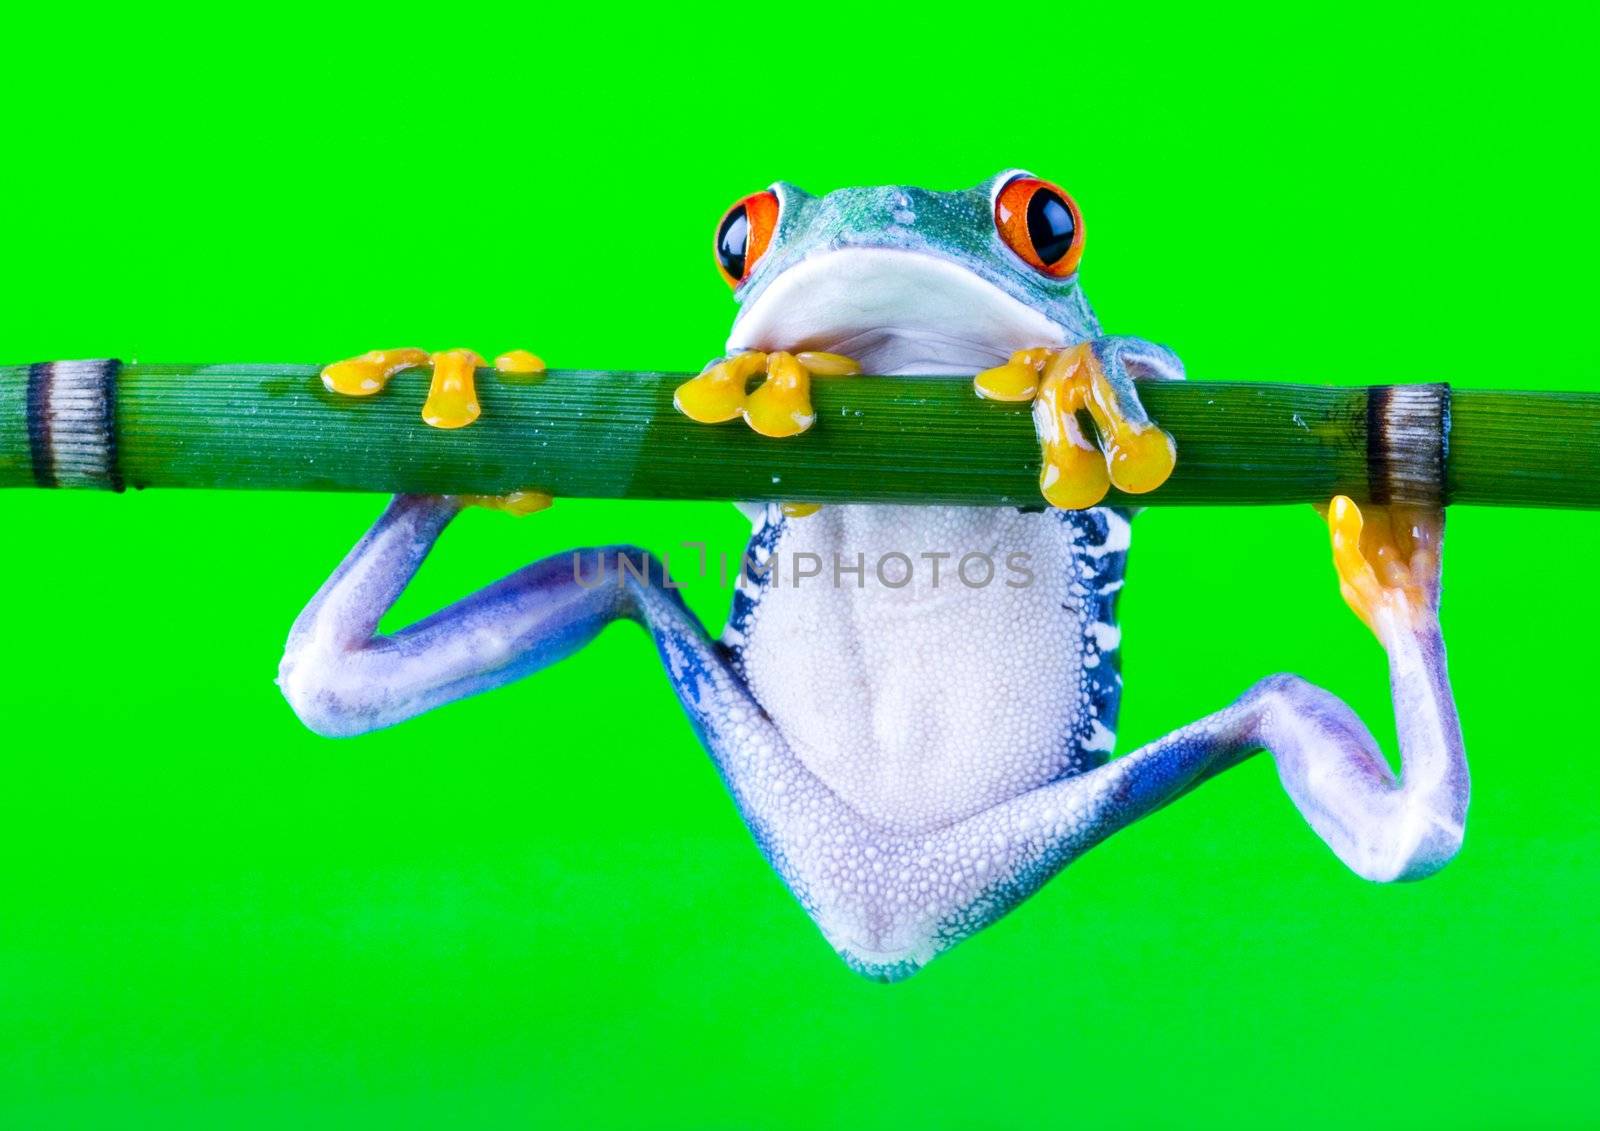 Frog - small animal with smooth skin and long legs that are used for jumping.